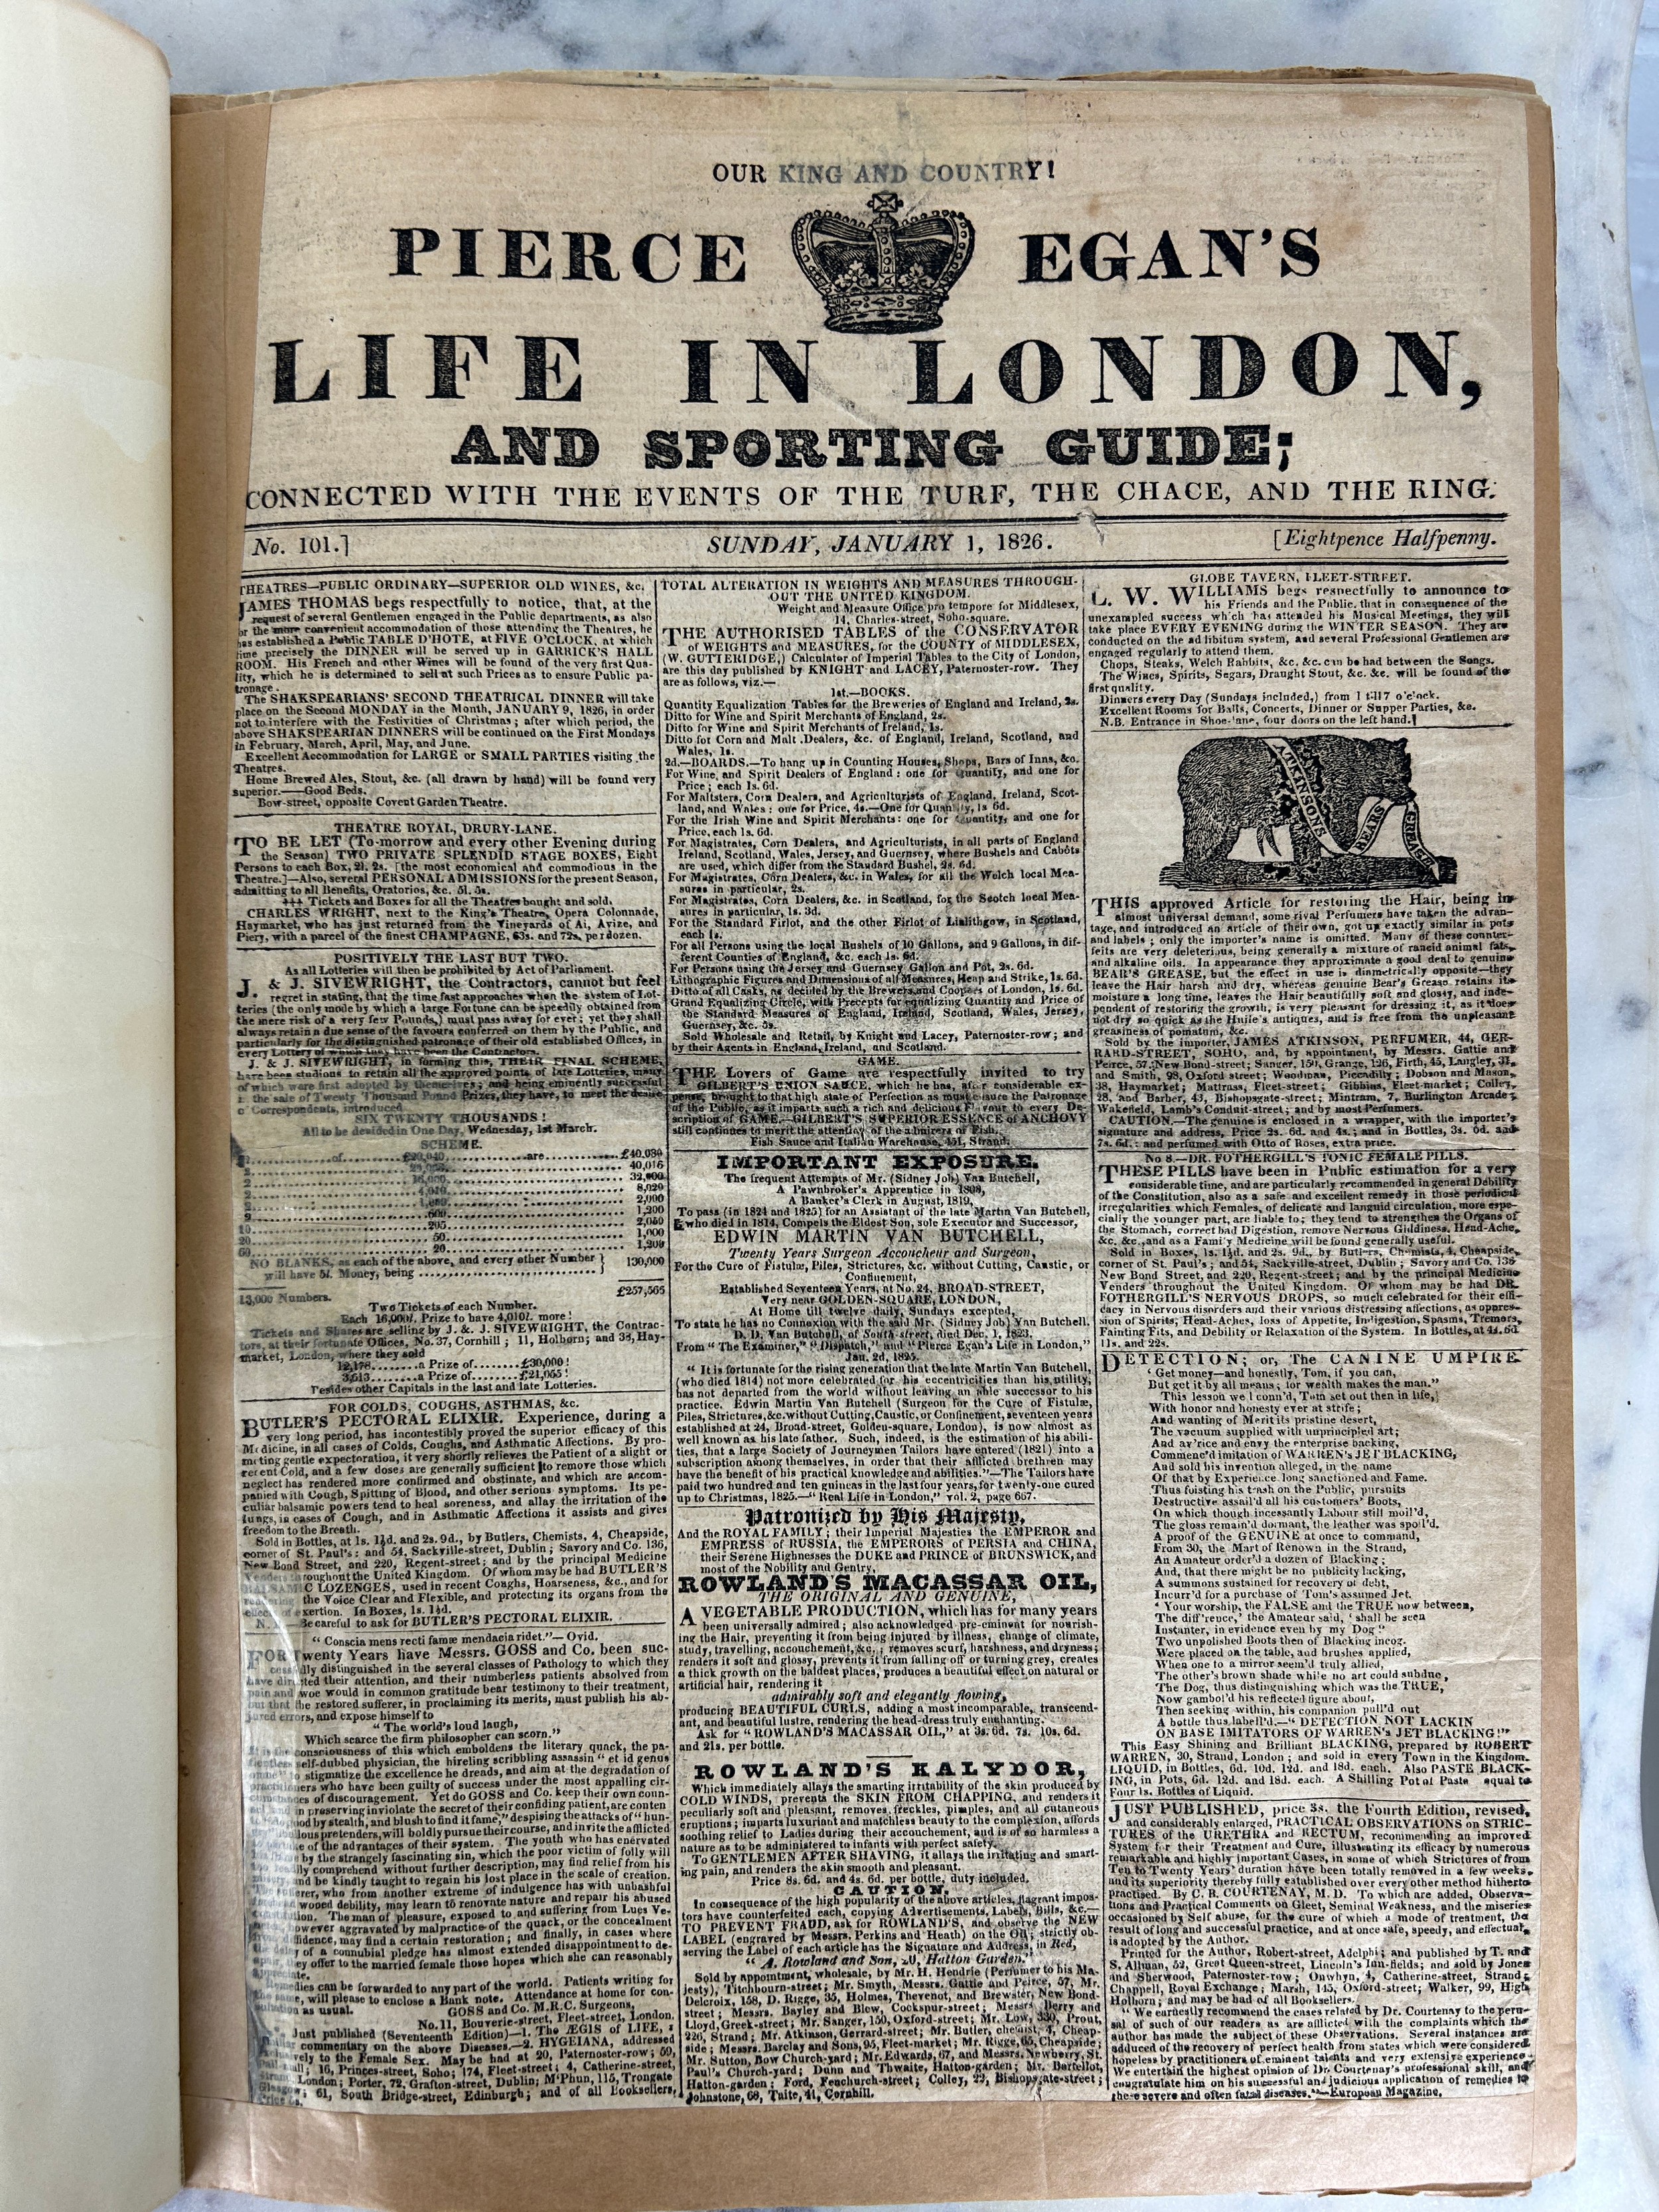 PIERCE EGAN: LIFE IN LONDON AND SPORTING GUIDE, 1826 EDITION, With various handwritten ink notes ( - Image 5 of 6